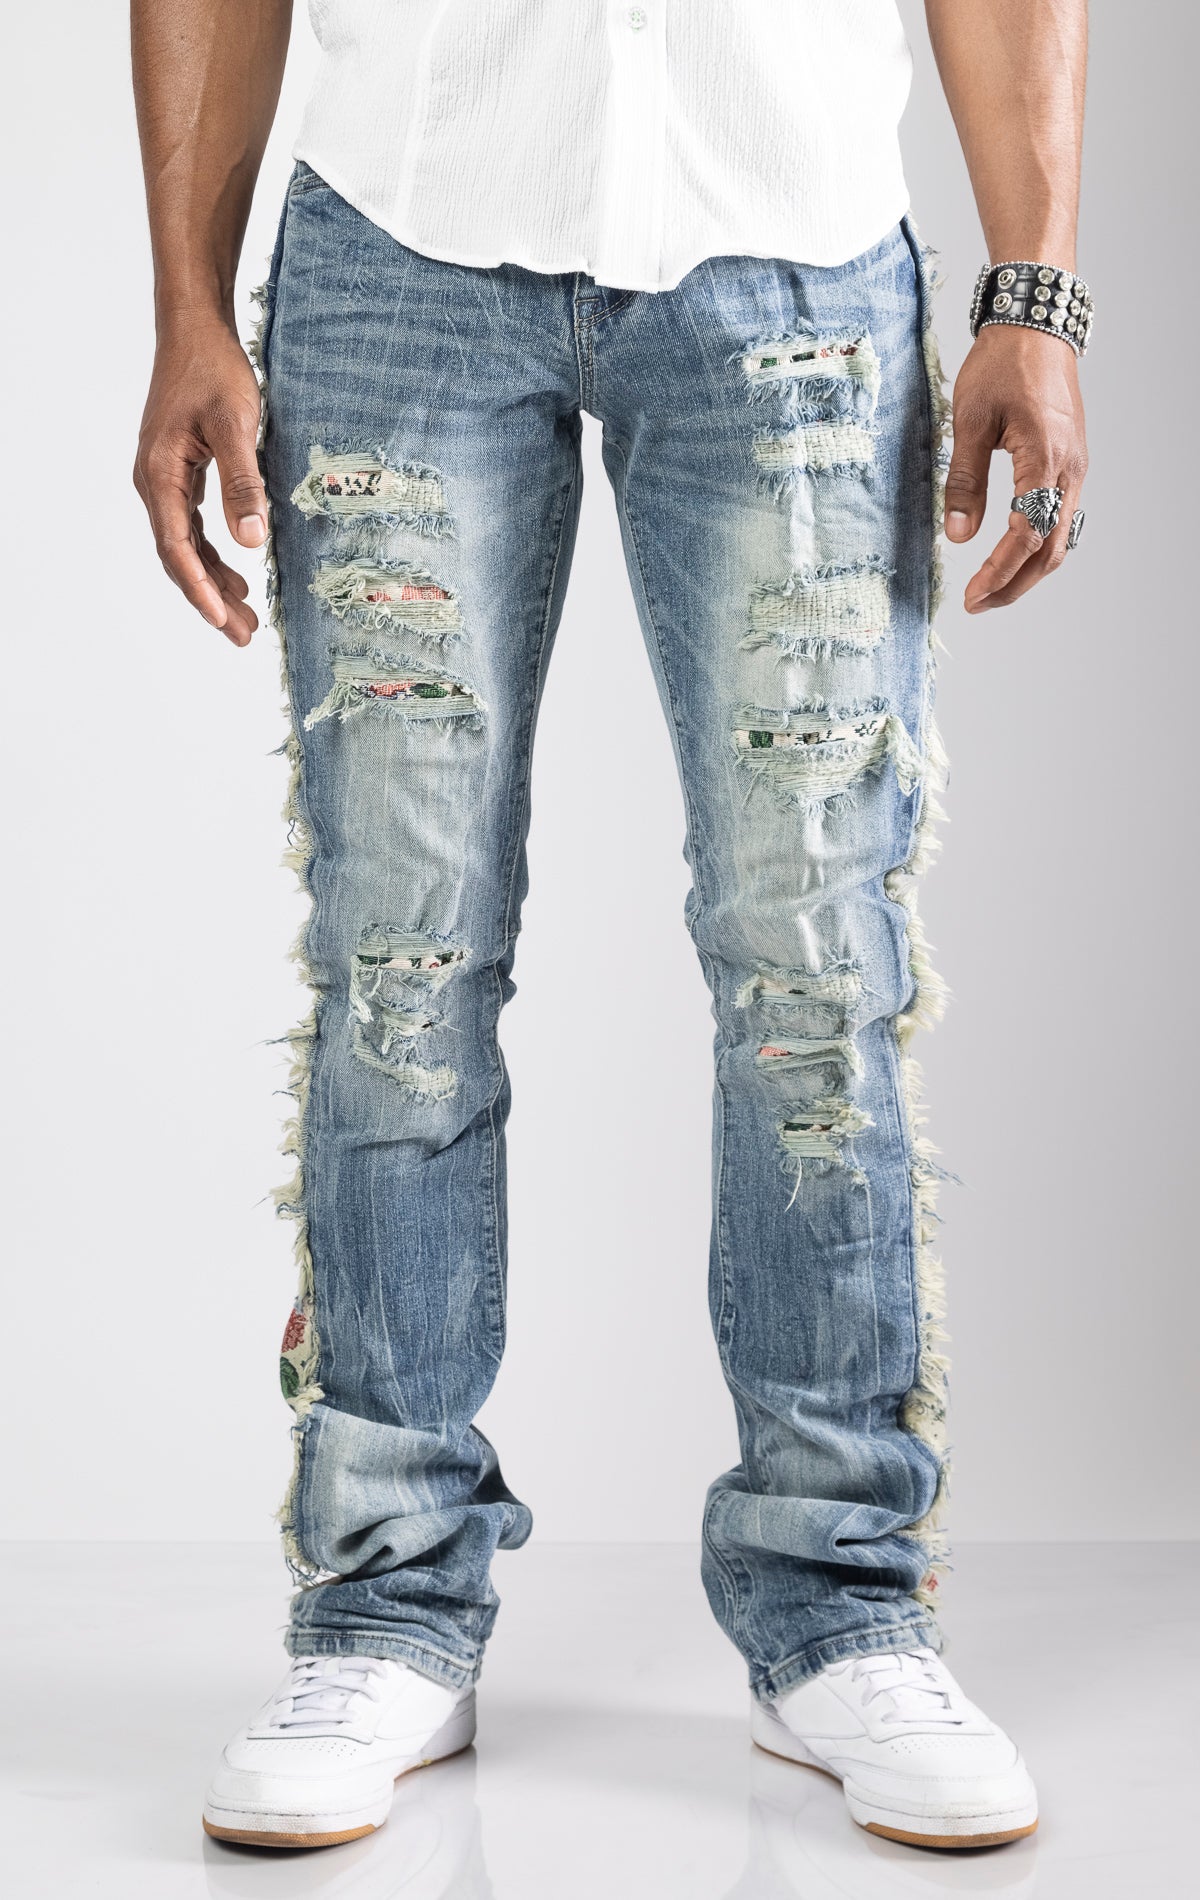 Tapestry Insert Stacked Denim Jeans in Hillside Blue. Slim fit jeans with stacked effect at the ankle.